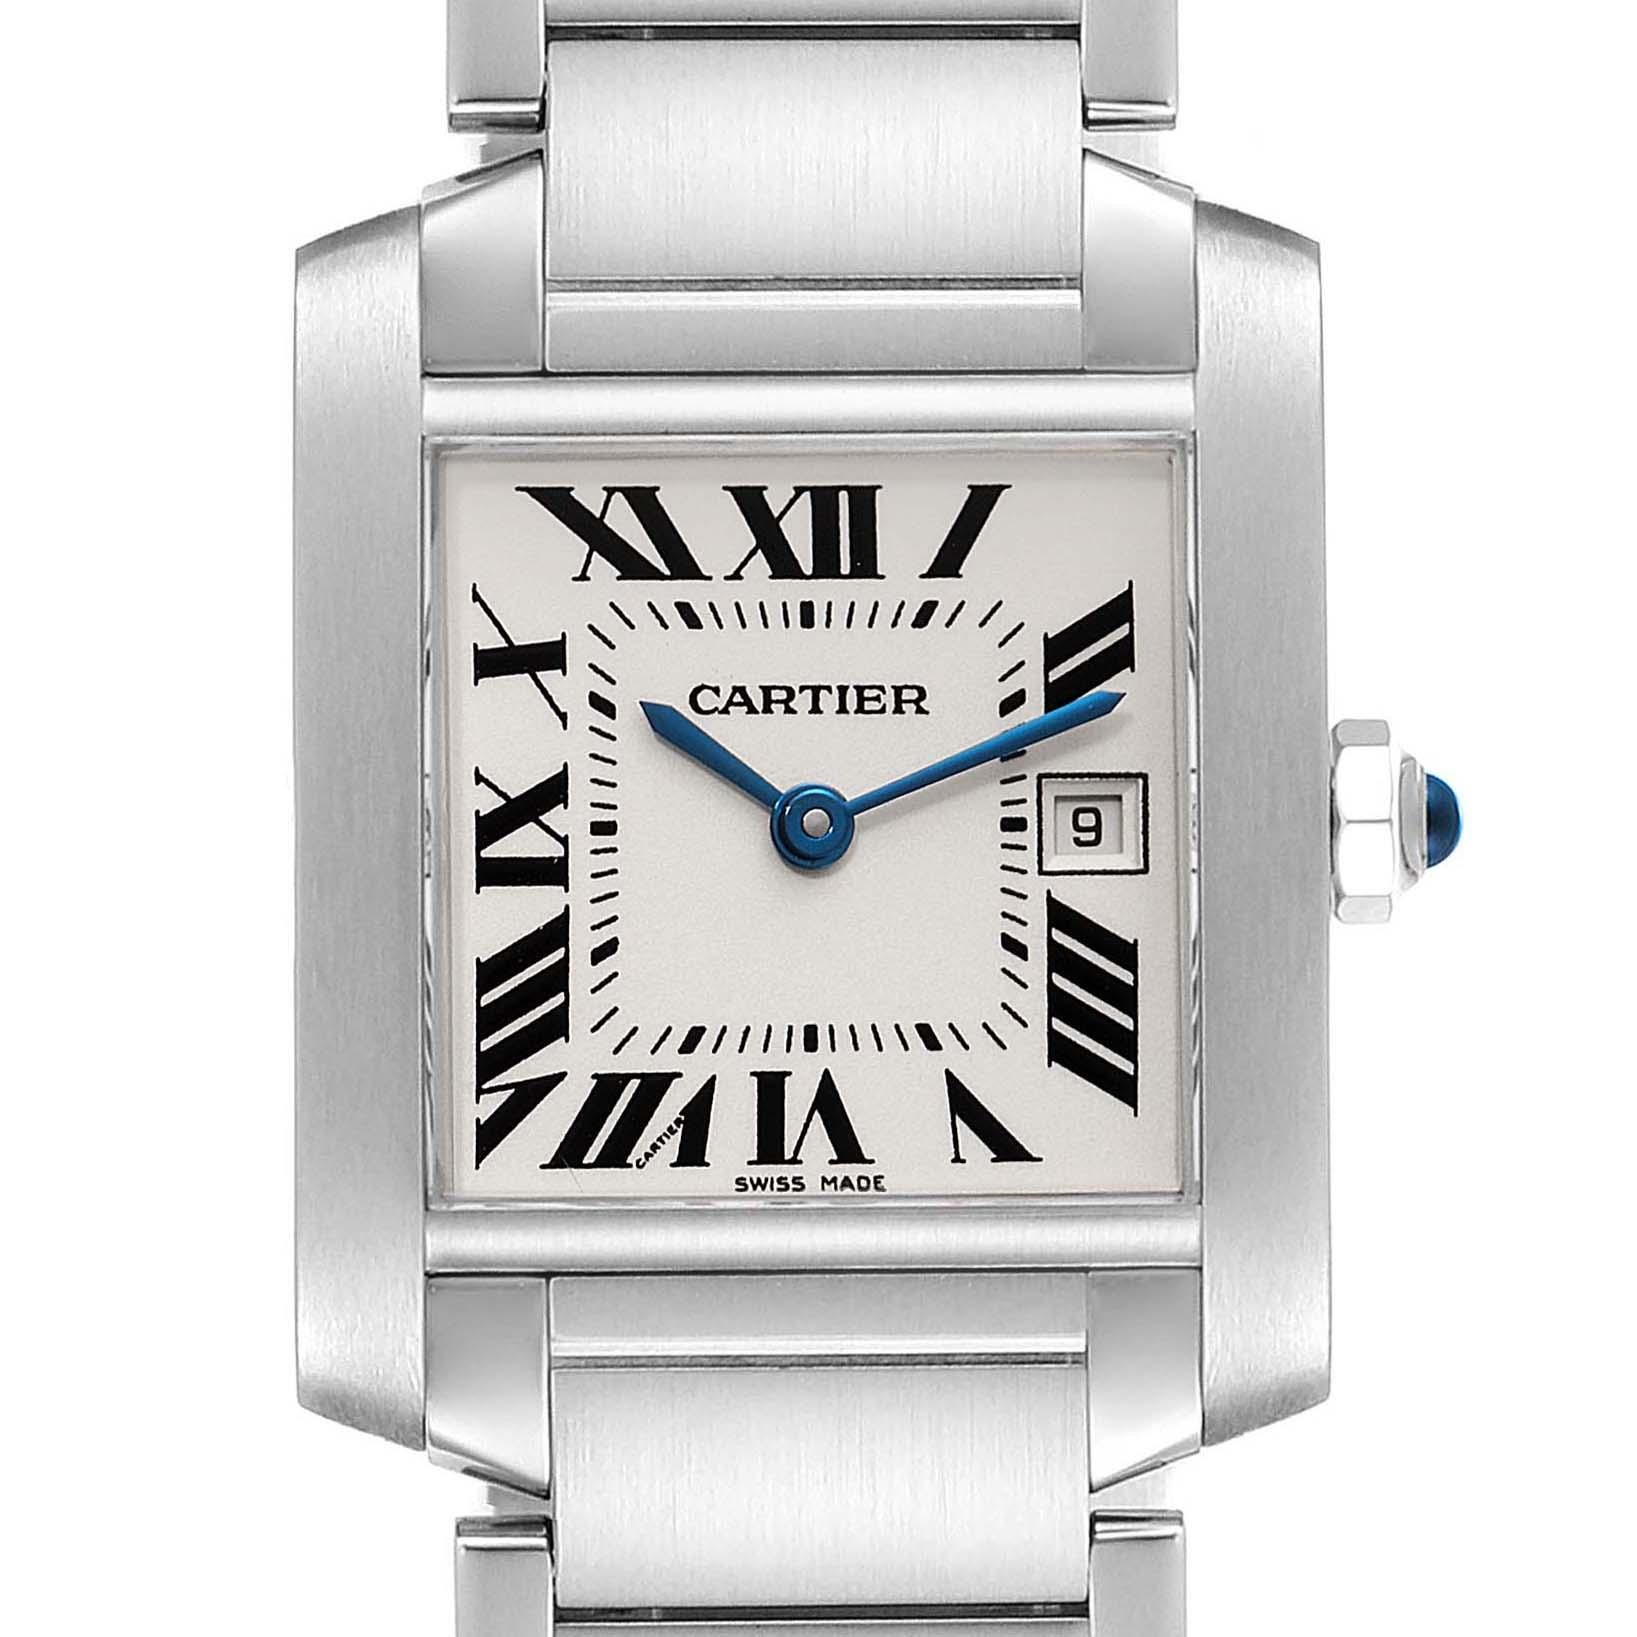 Cartier Tank Francaise Midsize 25mm Silver Dial Ladies Watch W51011Q3. Quartz movement. Rectangular stainless steel 25.0 X 30.0 mm case. Octagonal crown set with a blue spinel cabochon. . Scratch resistant sapphire crystal. Silvered dial with